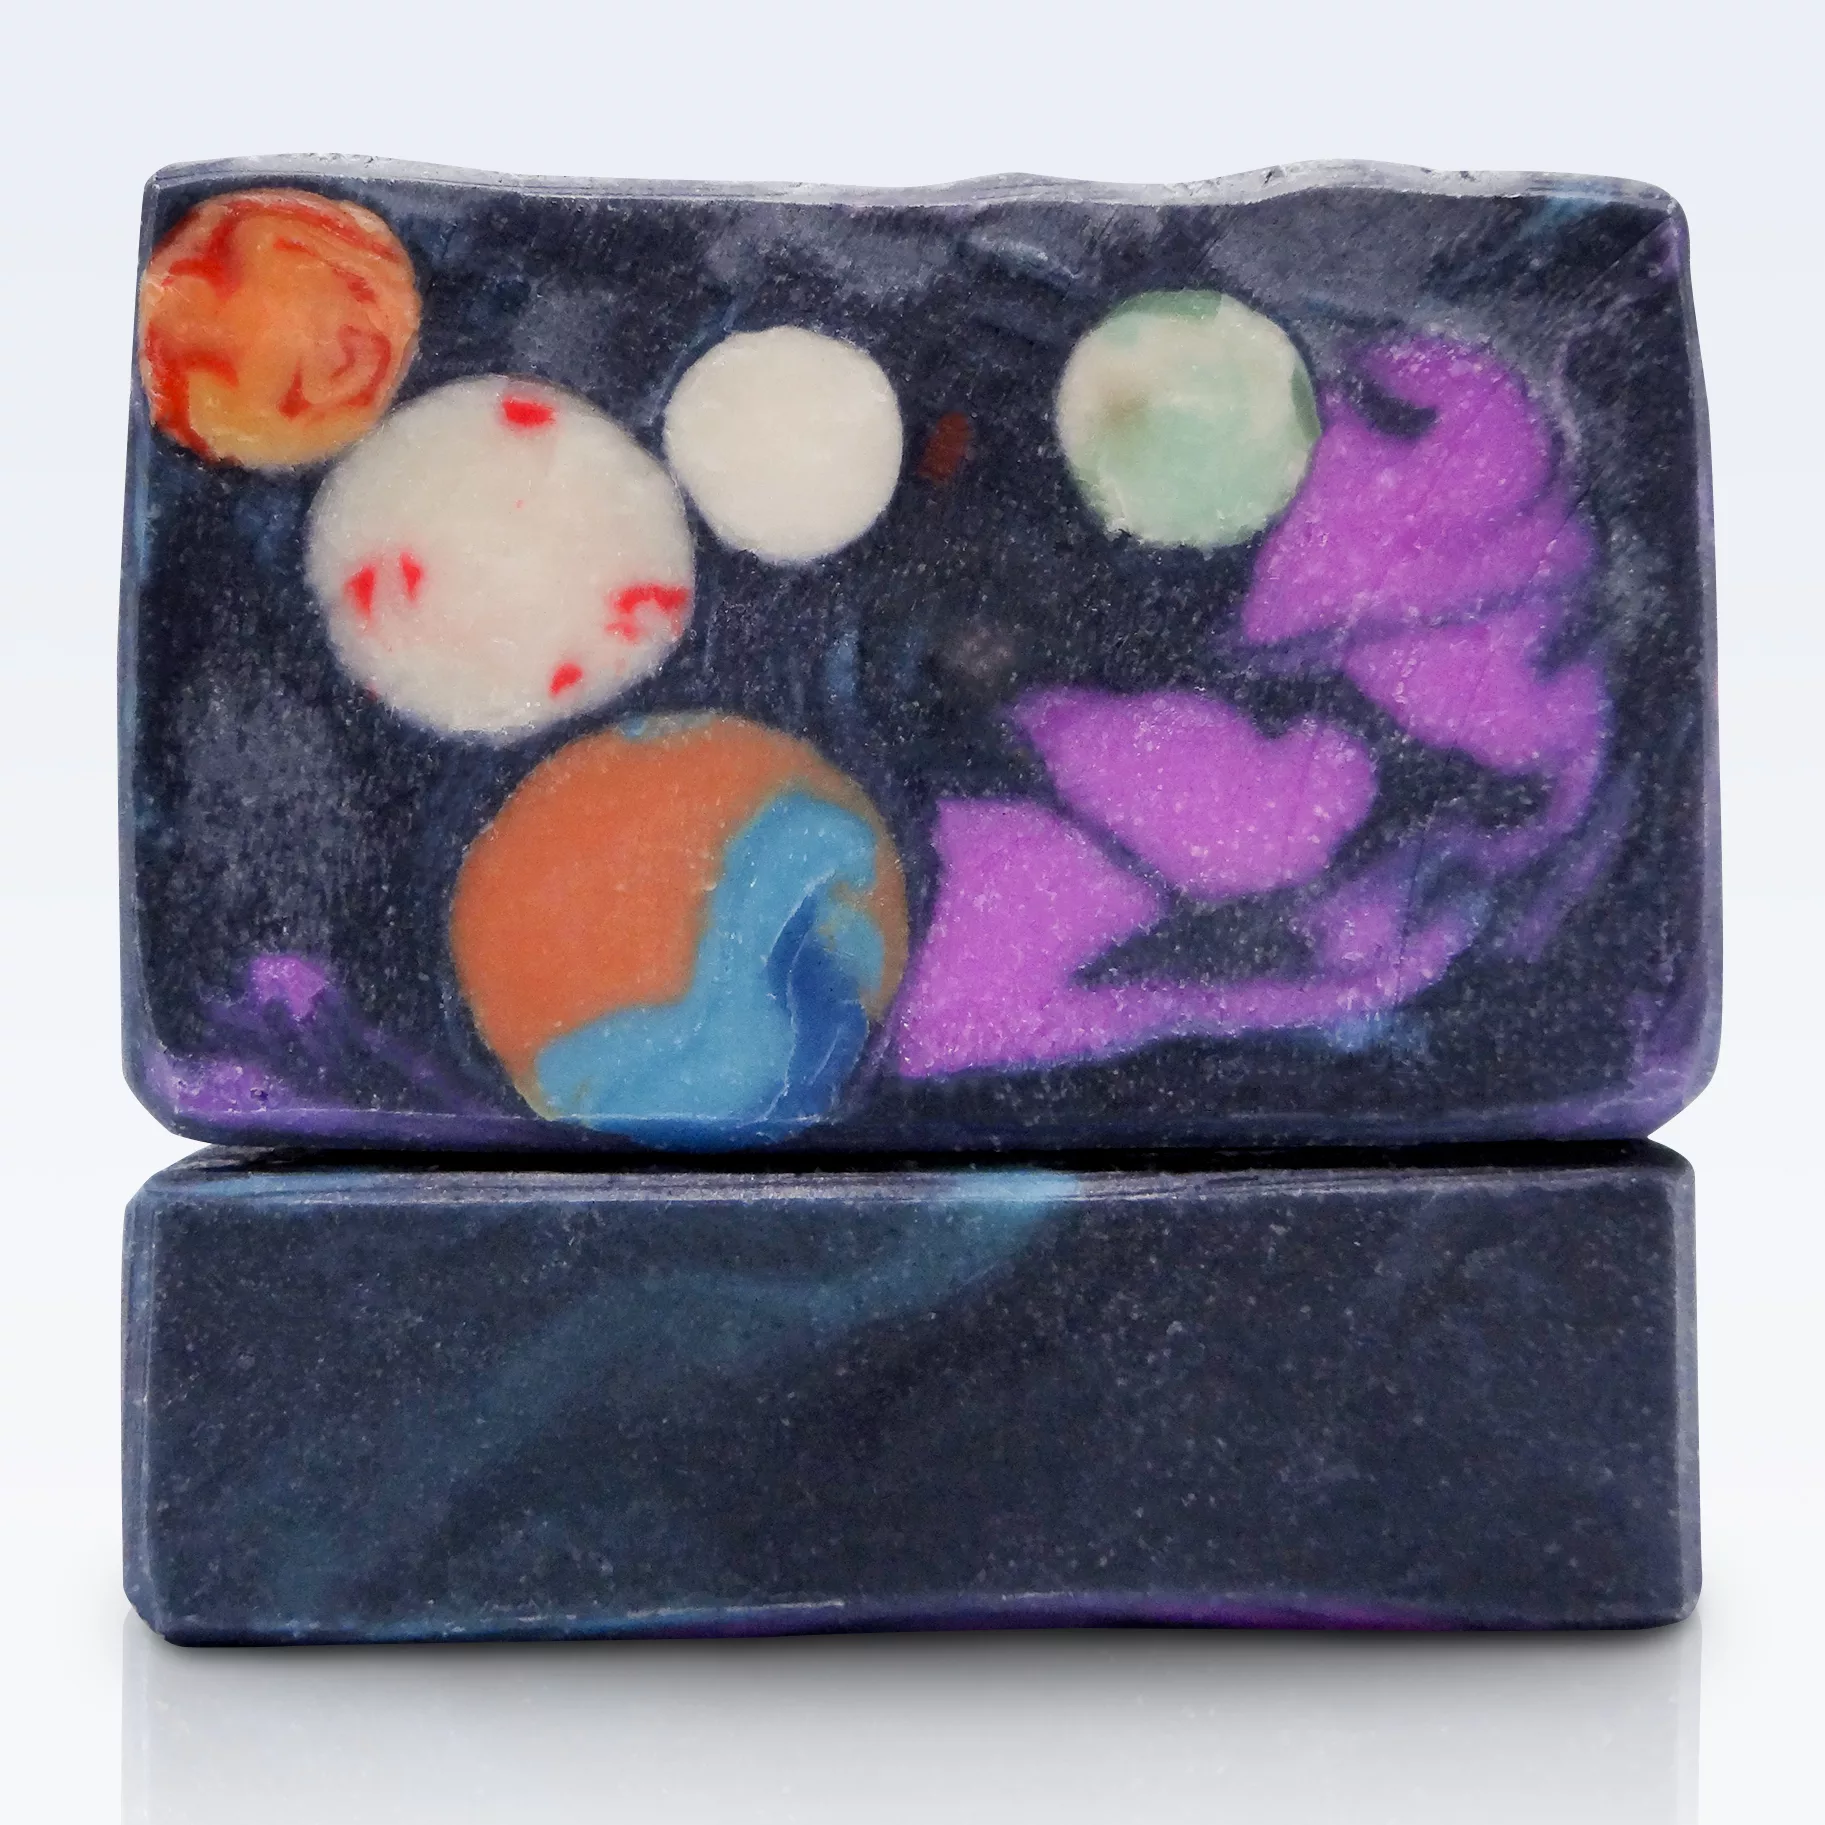 Intergalactic handmade soap by Tubby Tabby Soaps (galaxy soap with planets and green tea fragrance)